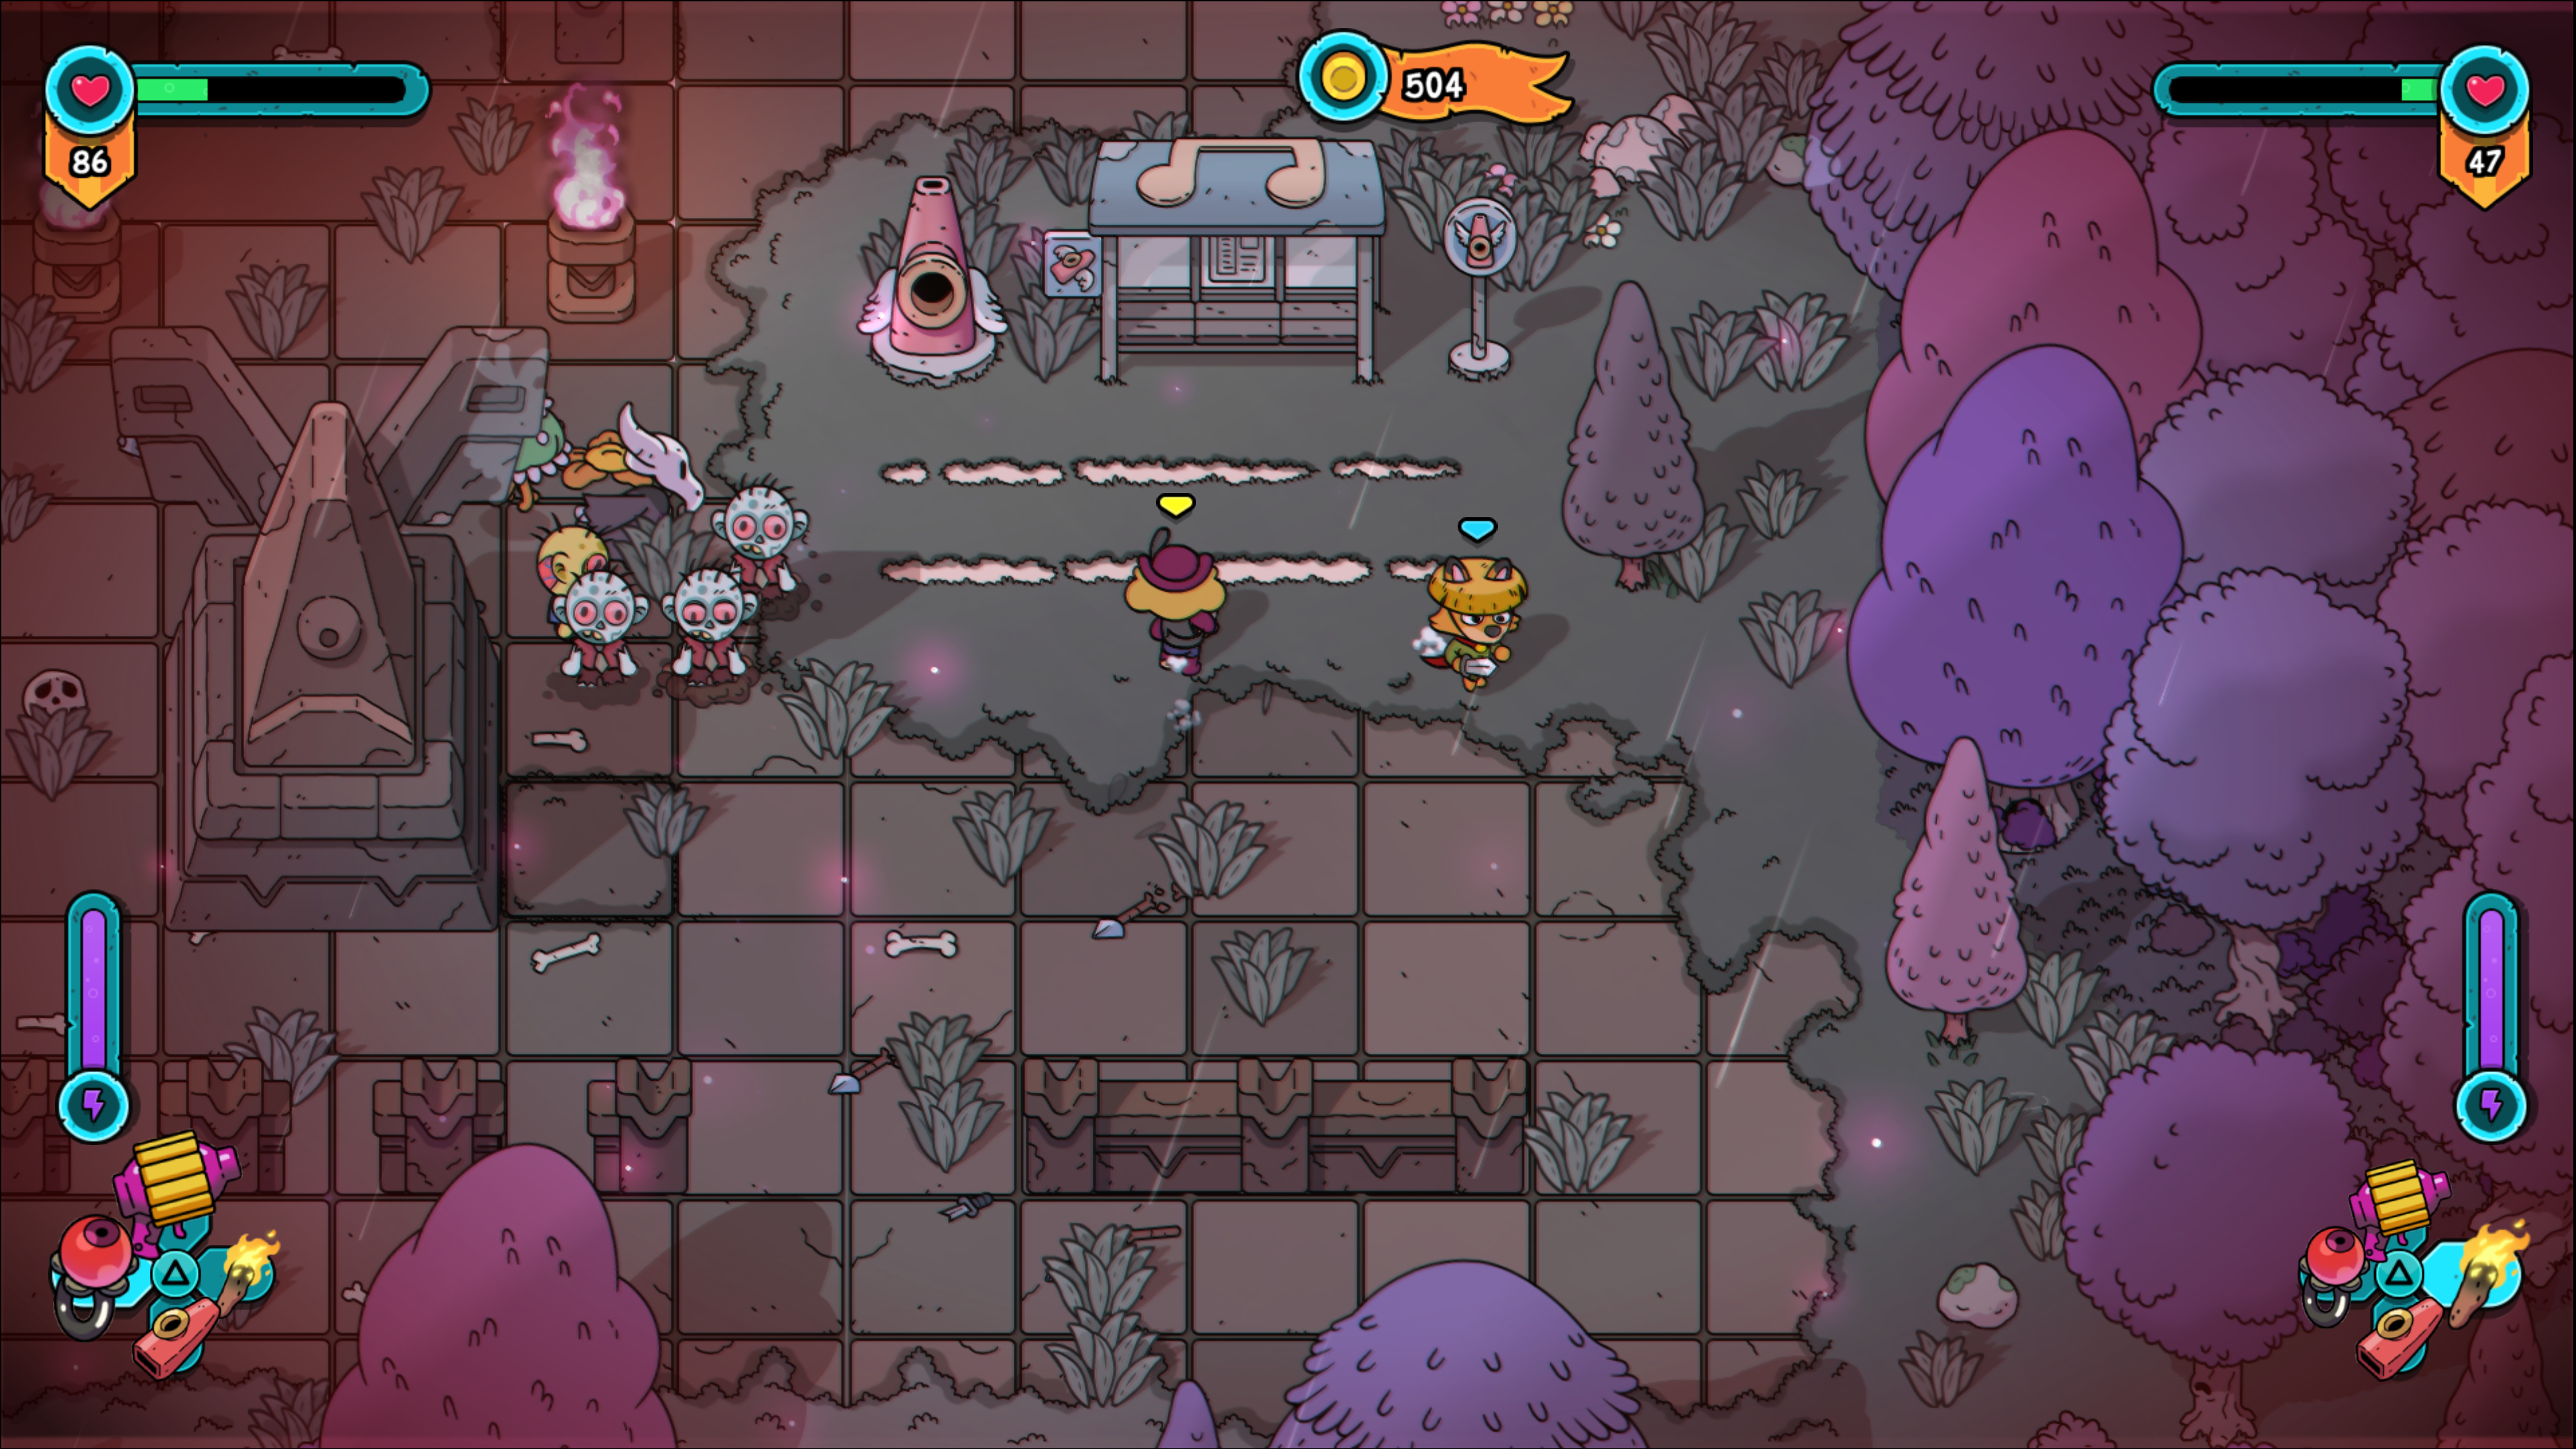 The Swords of Ditto Review